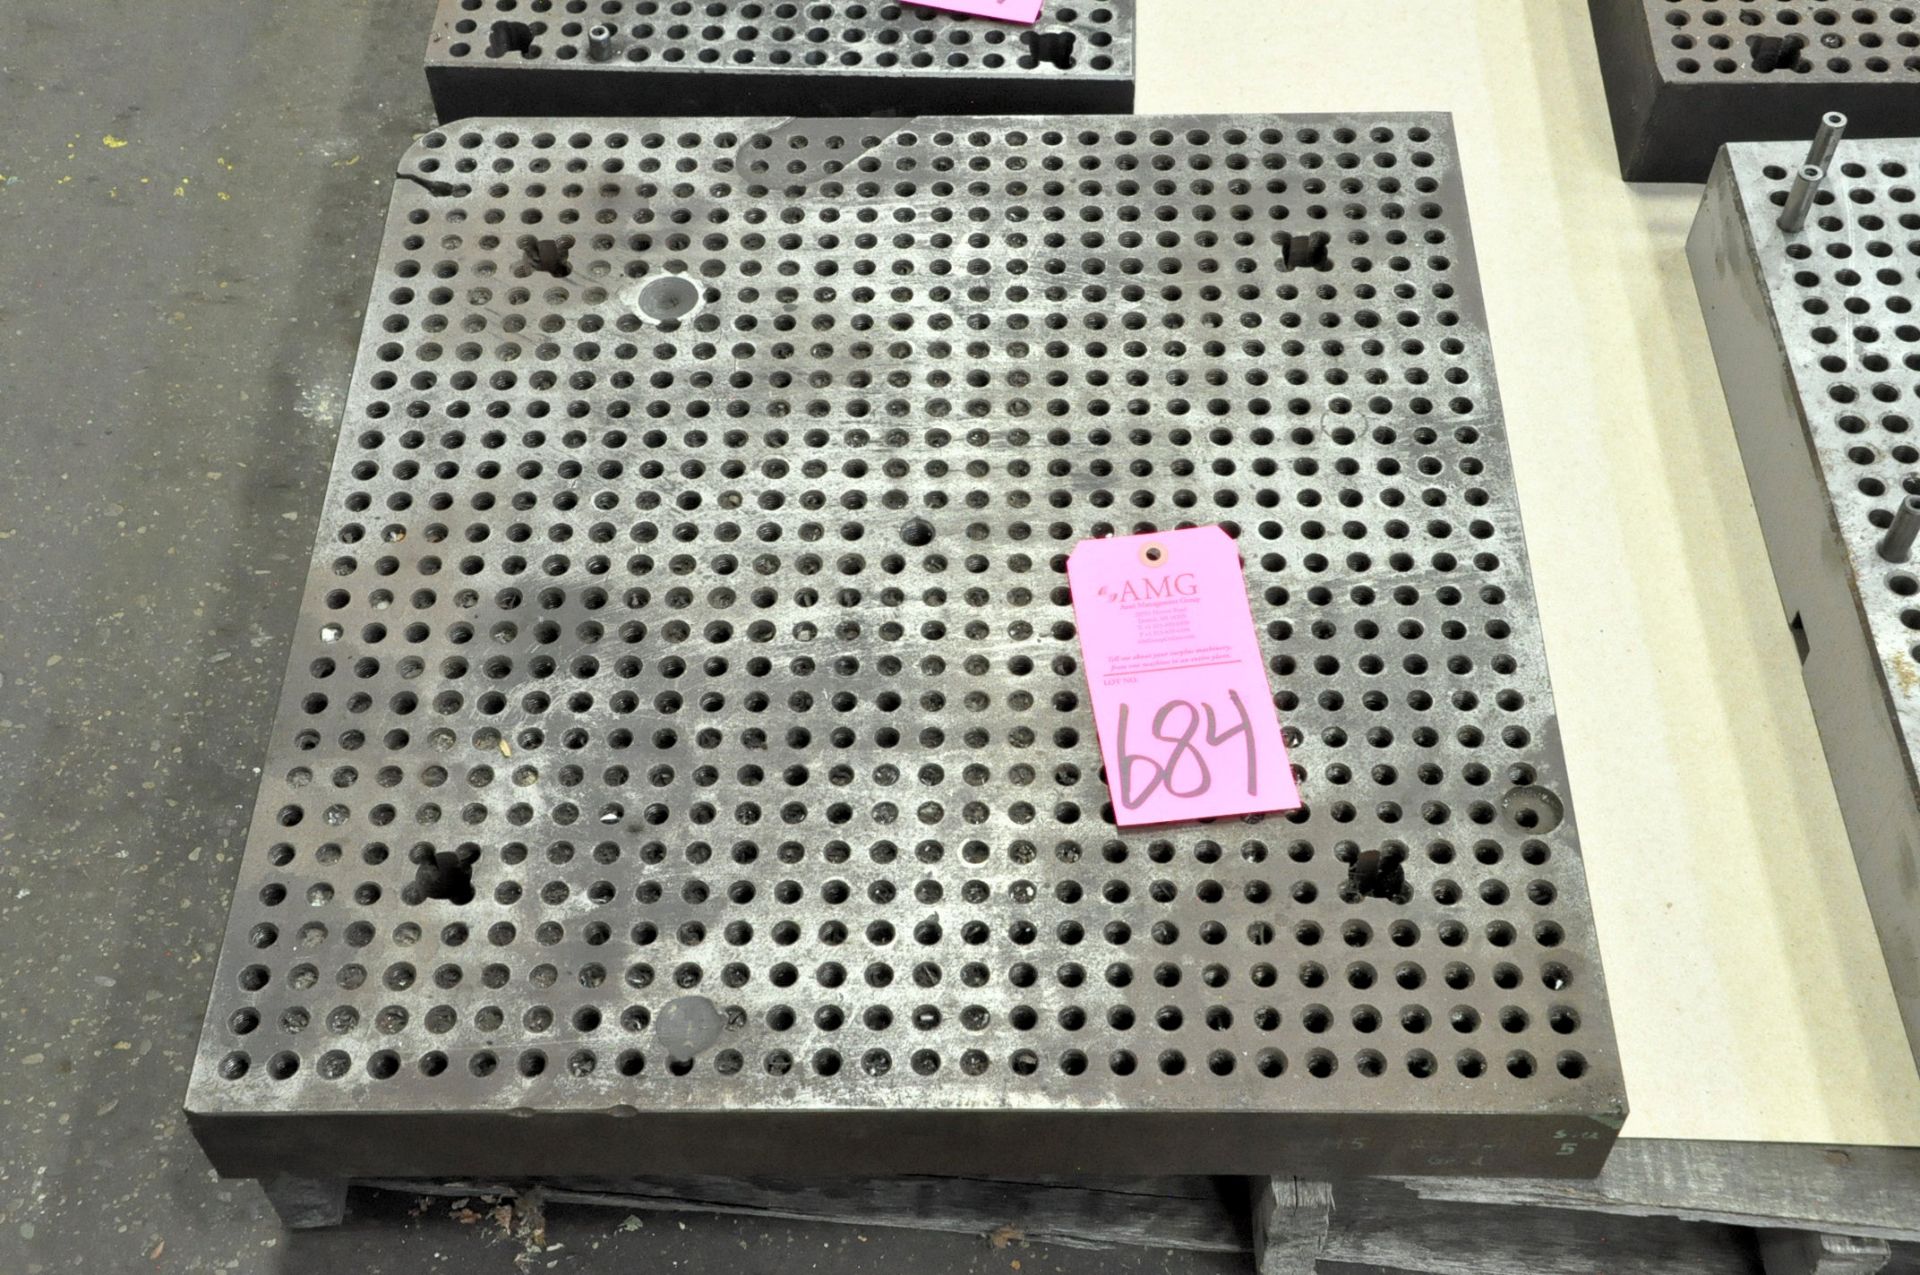 22 3/4" x 23 5/8" Drilled and Tapped Mounting Plate, (E-7), (Pink Tag)